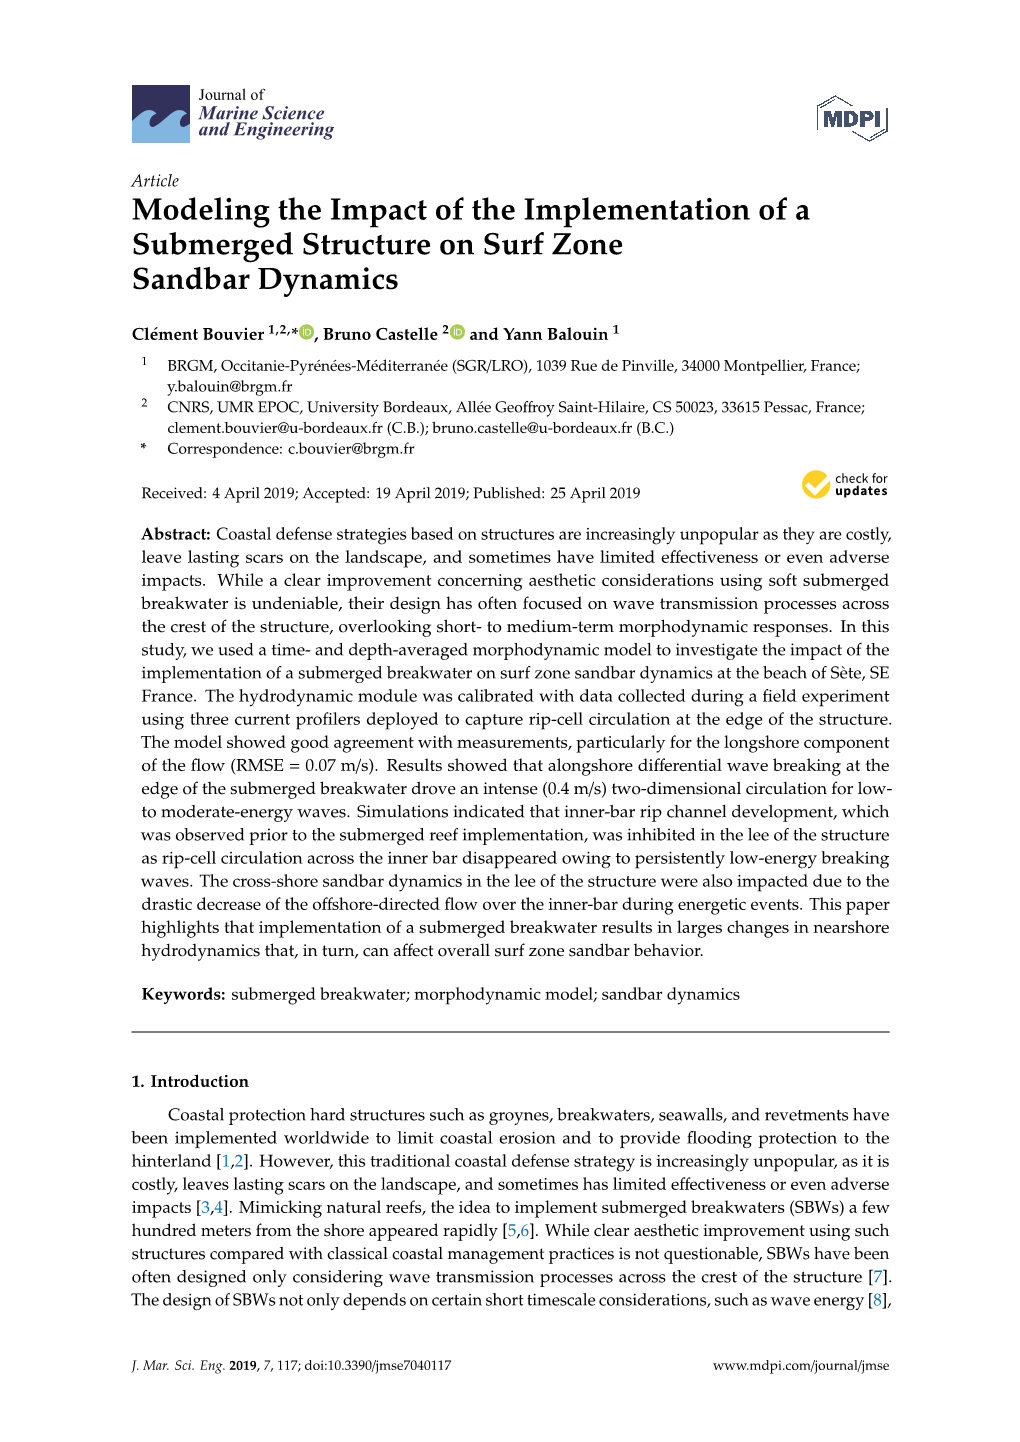 Modeling the Impact of the Implementation of a Submerged Structure on Surf Zone Sandbar Dynamics